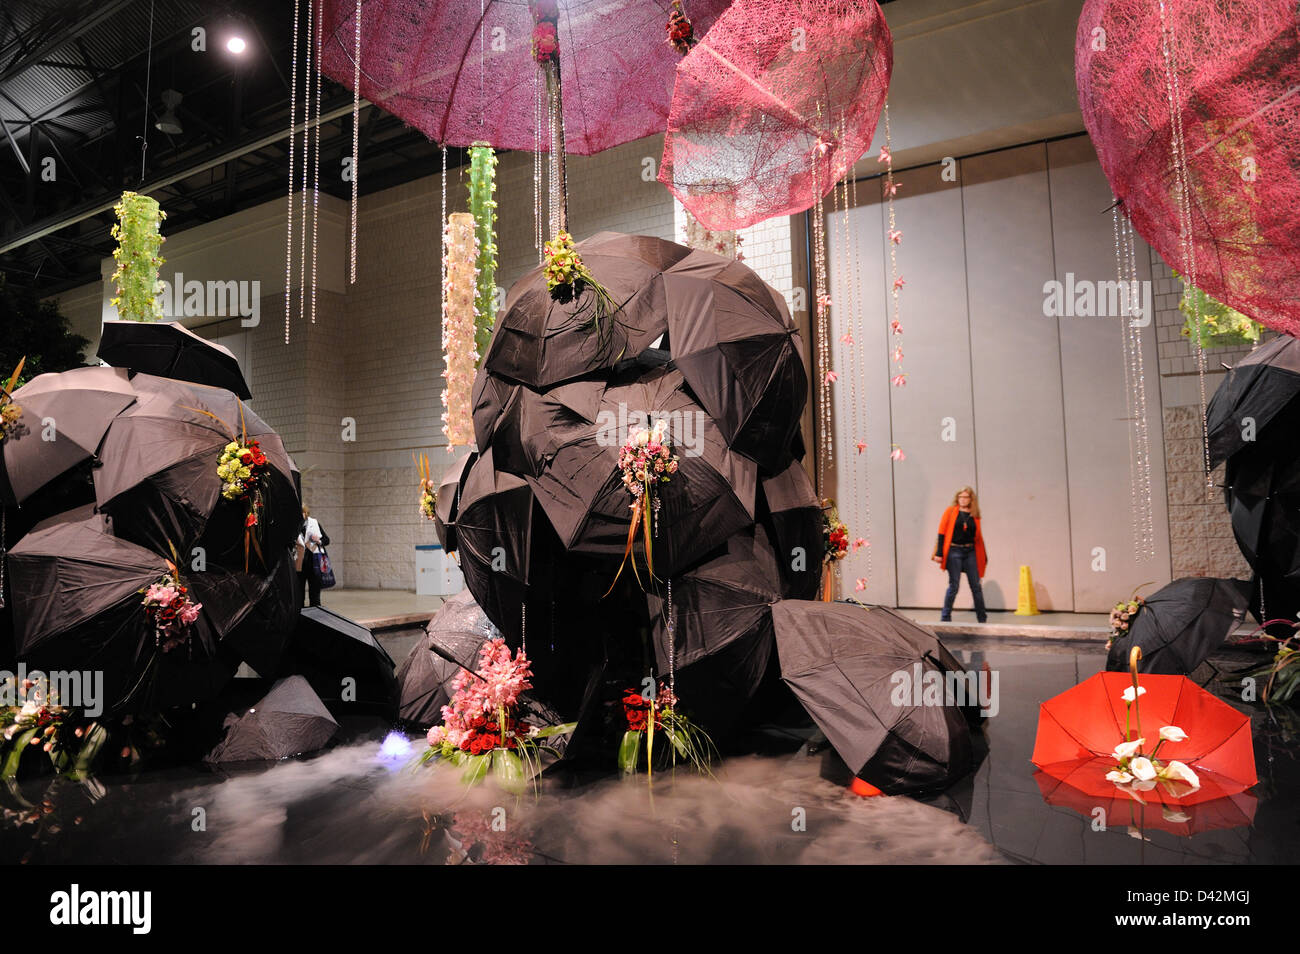 Philadelphia, PA, USA. March 1, 2013. The Philadelphia Flower Show, the largest indoor flower show in the world, opened to the public on March 2, 2013 at the Pennsylvania Convention Center in Philadelphia, Pa. This year's theme, "Brilliant," celebrates Great Britain's landscapes and cultural icons. Among the exhibits is one called "London Fog" with umbrellas and flower arrangements poised above a reflecting pool. The flower show, produced by the Pennsylvania Horticultural Society, was first held in 1829. This year's show runs through March 10. Photo: Terese Loeb Kreuzer/Alamy Live News Stock Photo